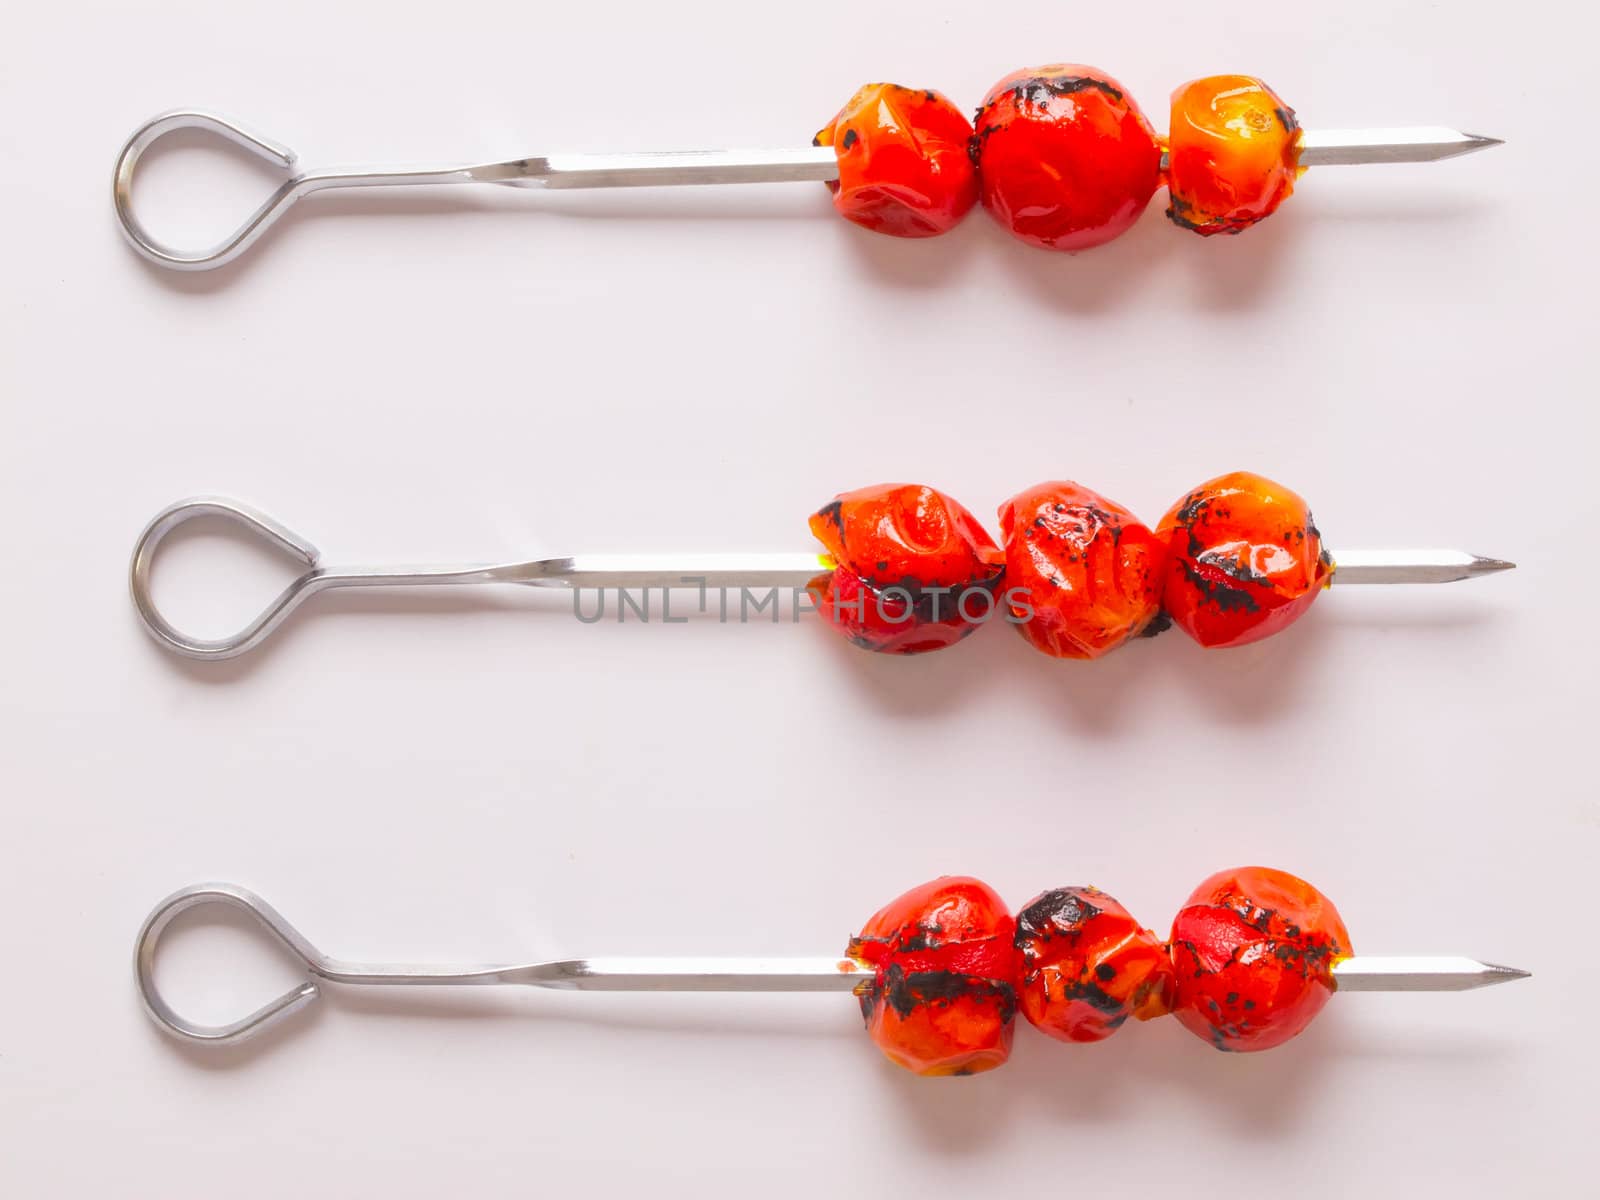 cherry tomato skewers by zkruger